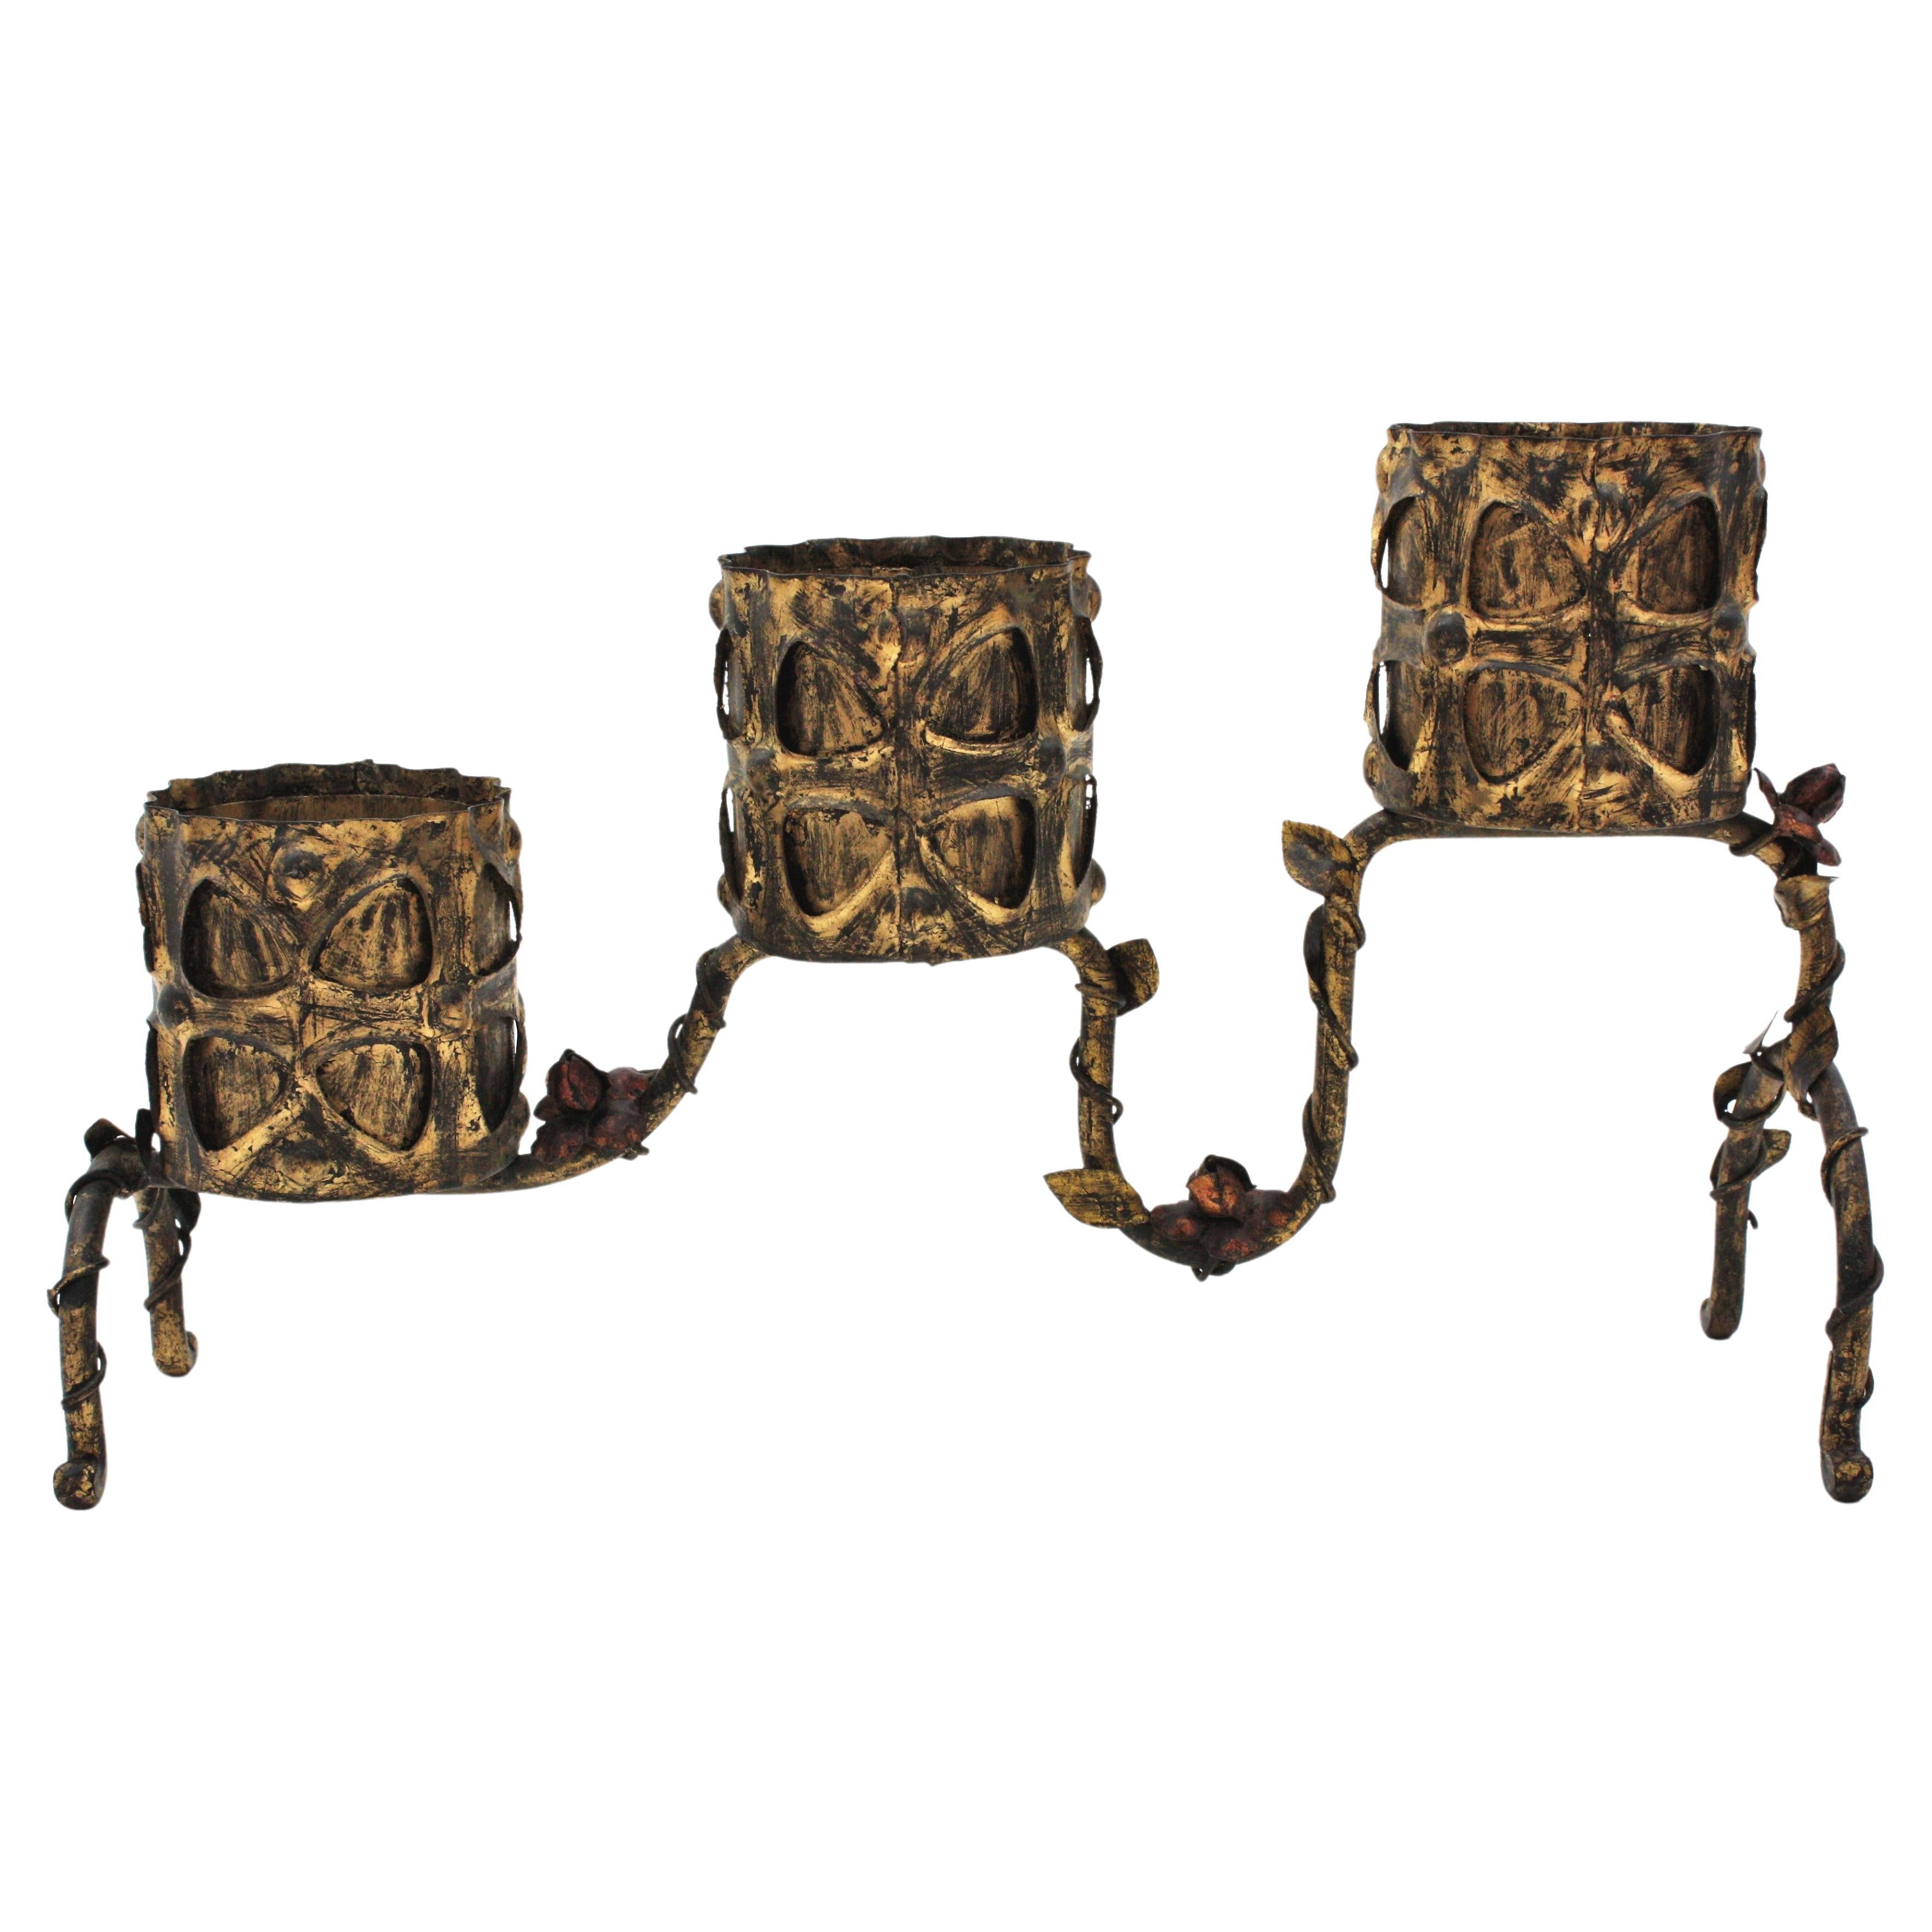 Spanish Gilt Iron Planter / Three Plant Stand with Foliage Floral Motifs, 1950s For Sale